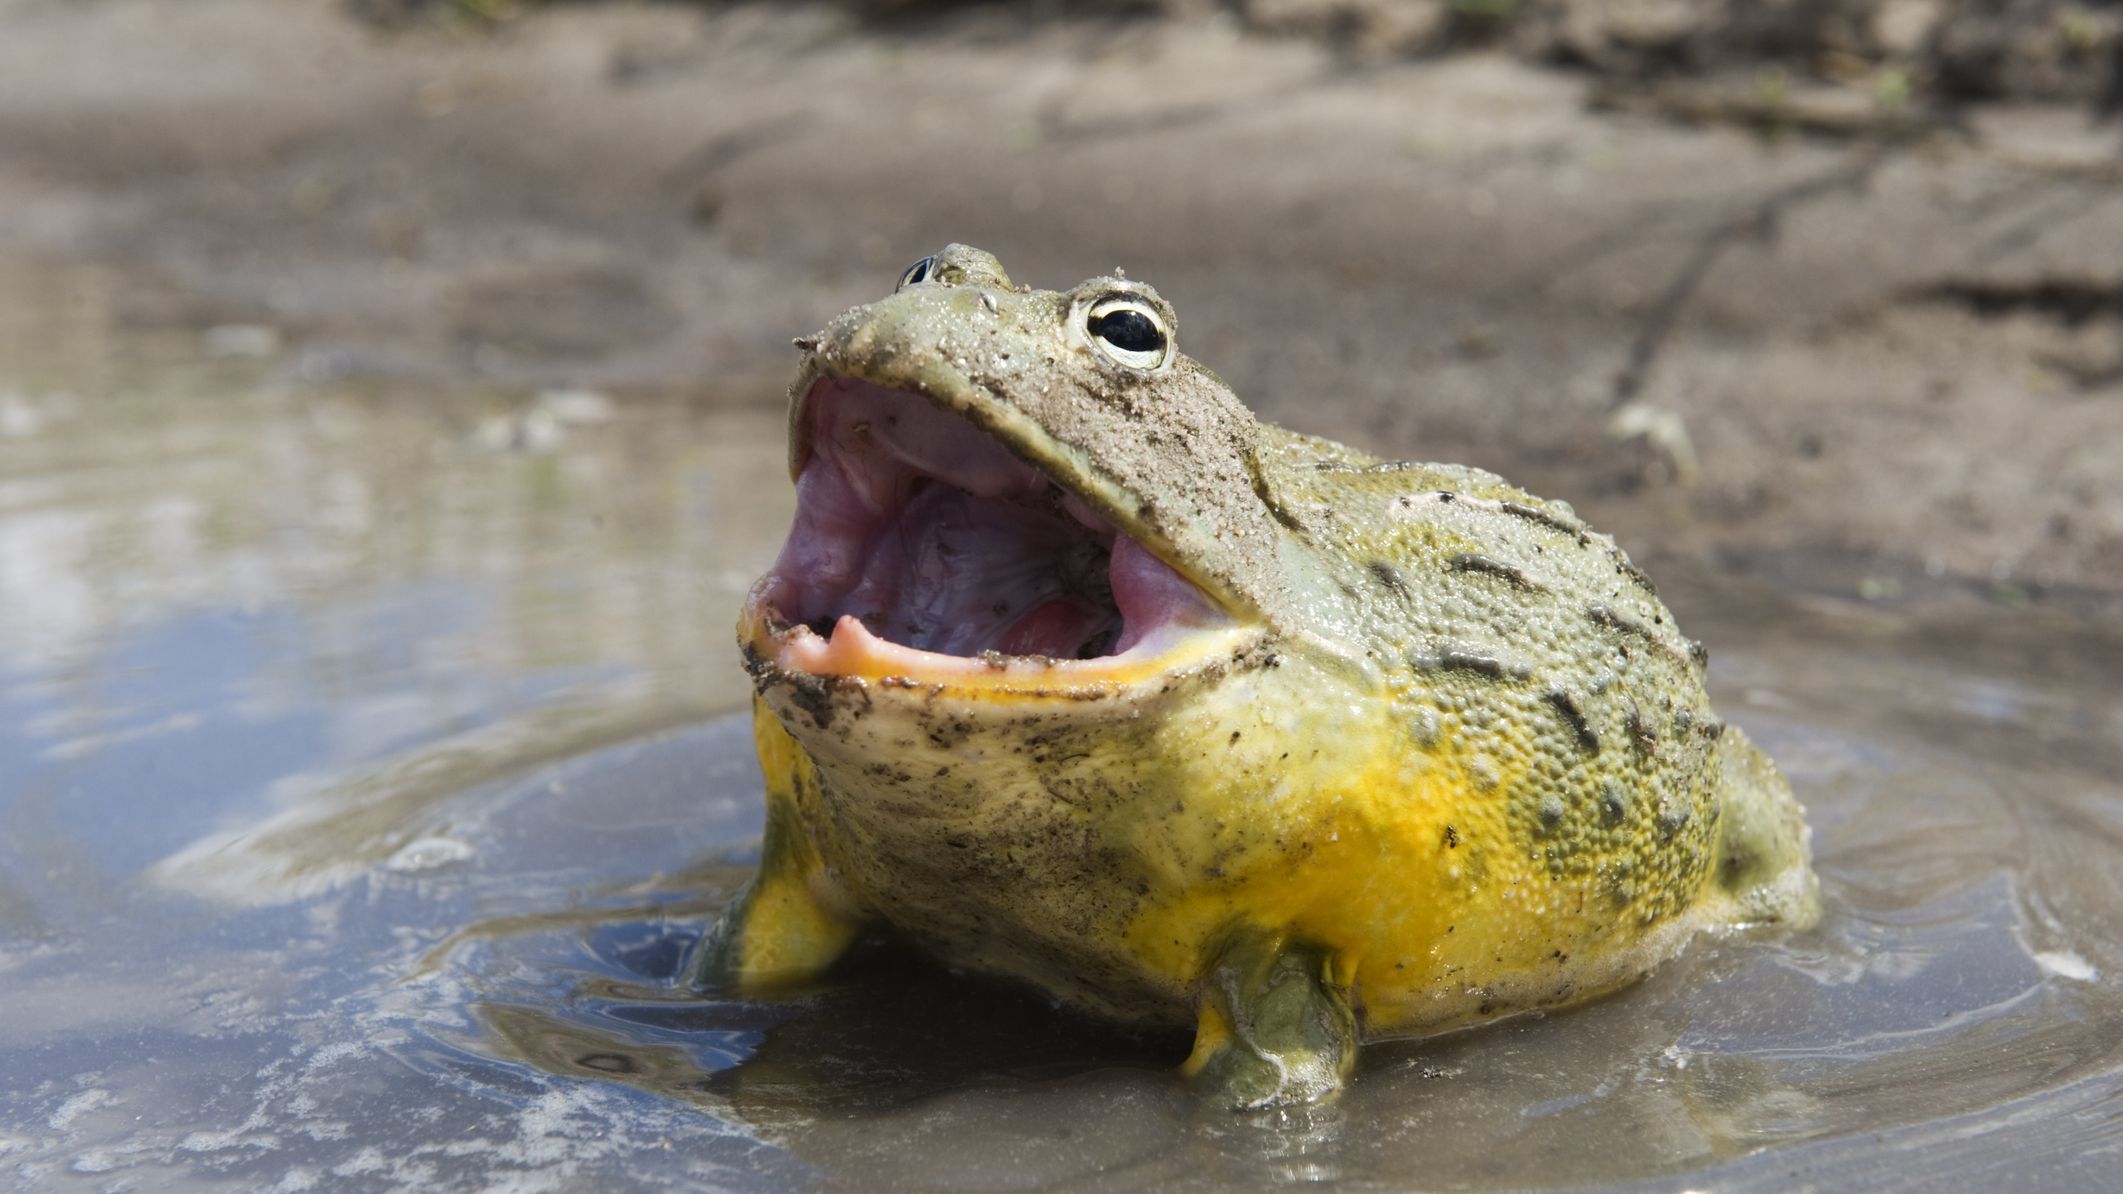 Can you keep bullfrogs as pets?